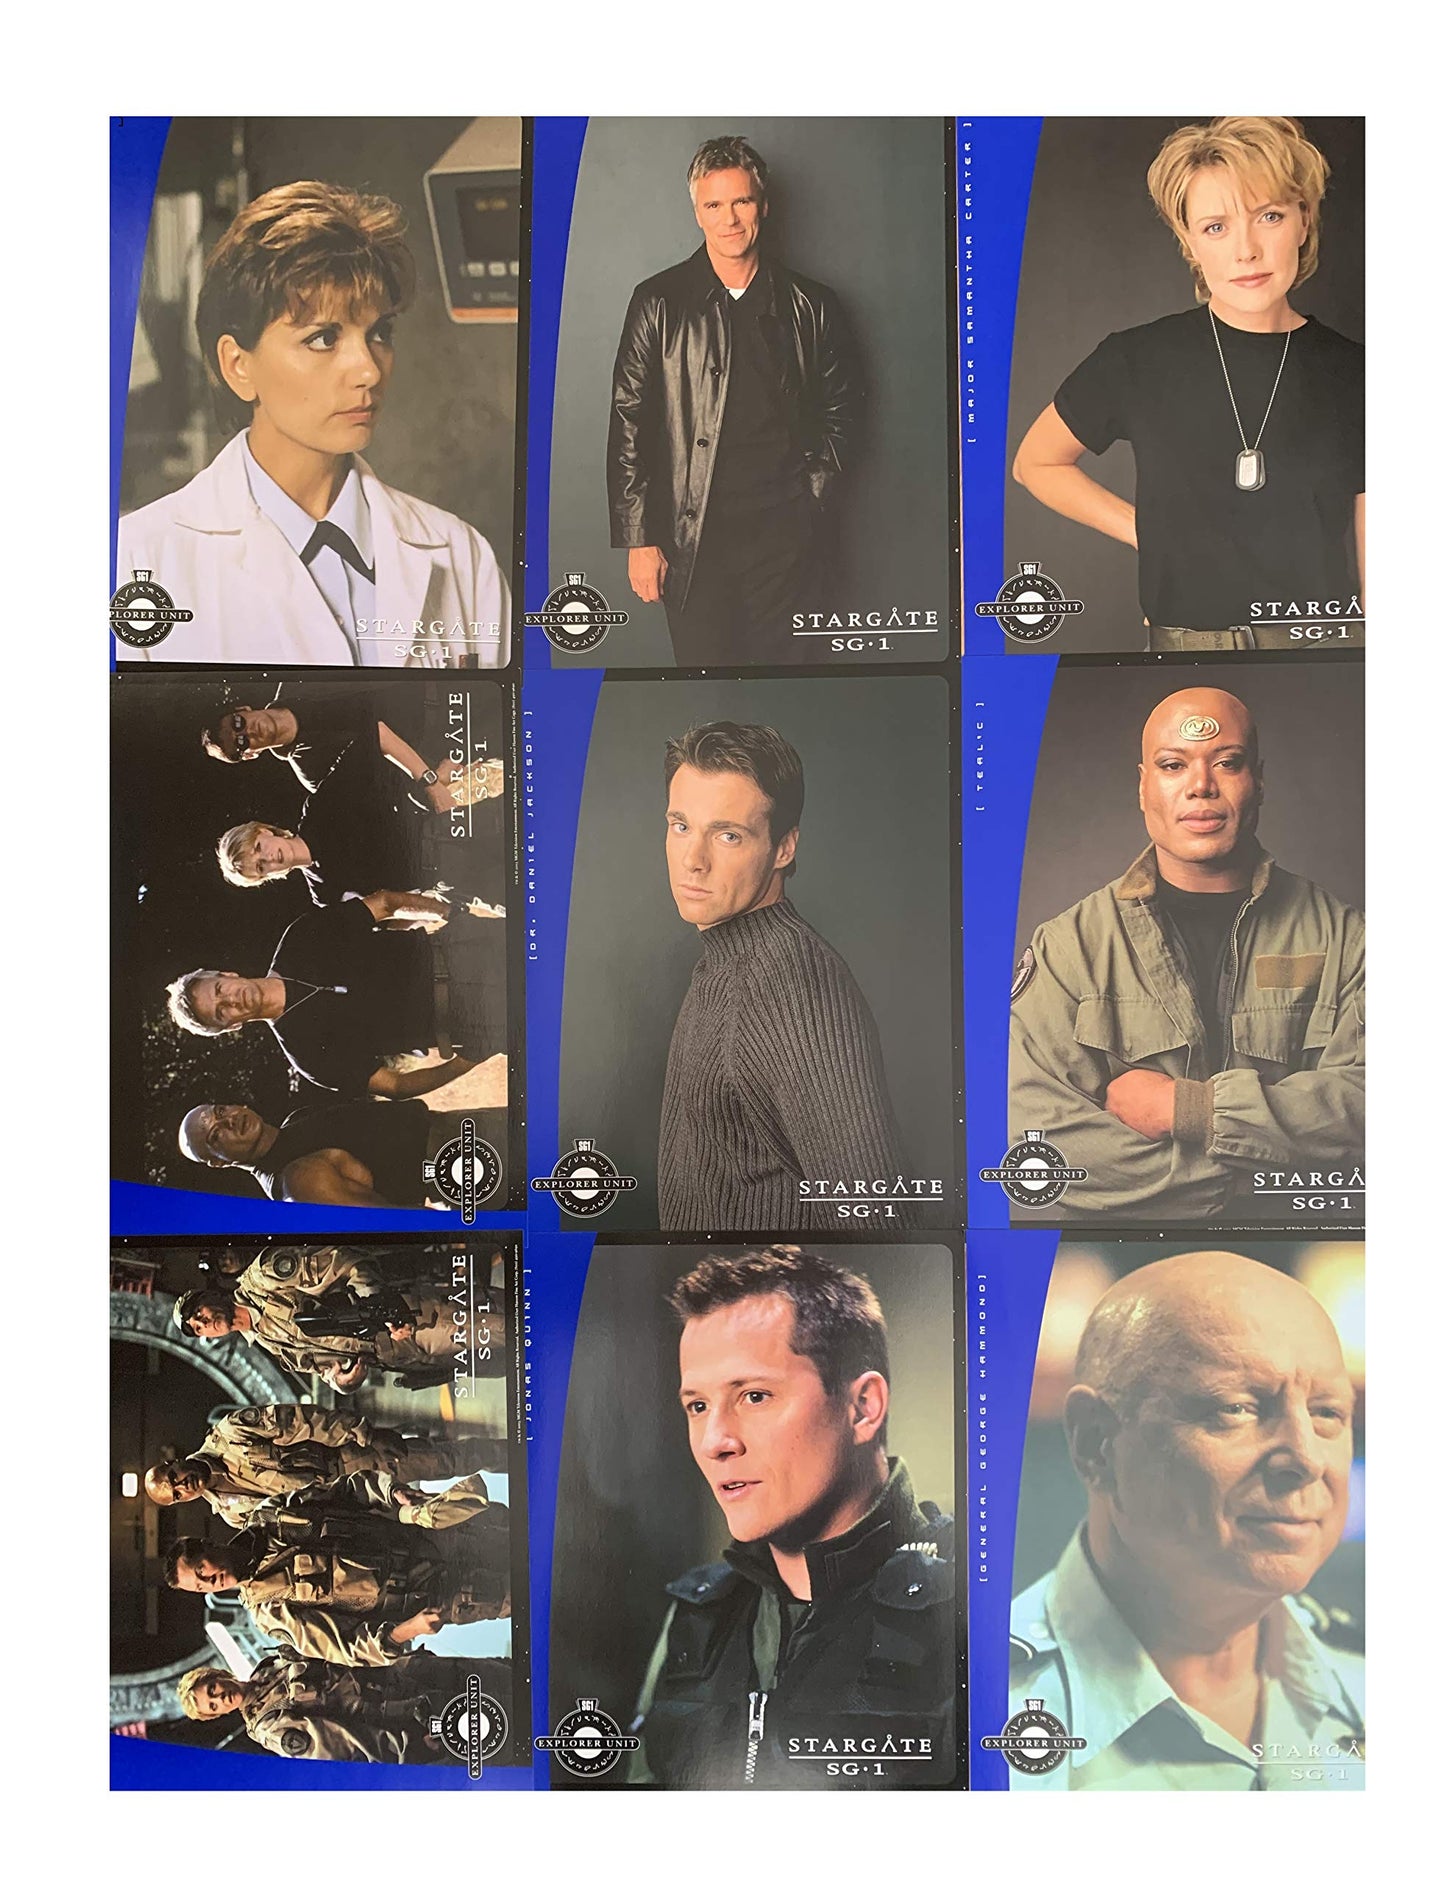 Vintage Ultra Rare 2003 Stargate SG-1 Explorer Unit Field Pack Year Two - Includes CD-Rom, Photos, Poster, Sticker, I.D Badges, Pin, Keyring & Classified Information - Former Shop Display Set